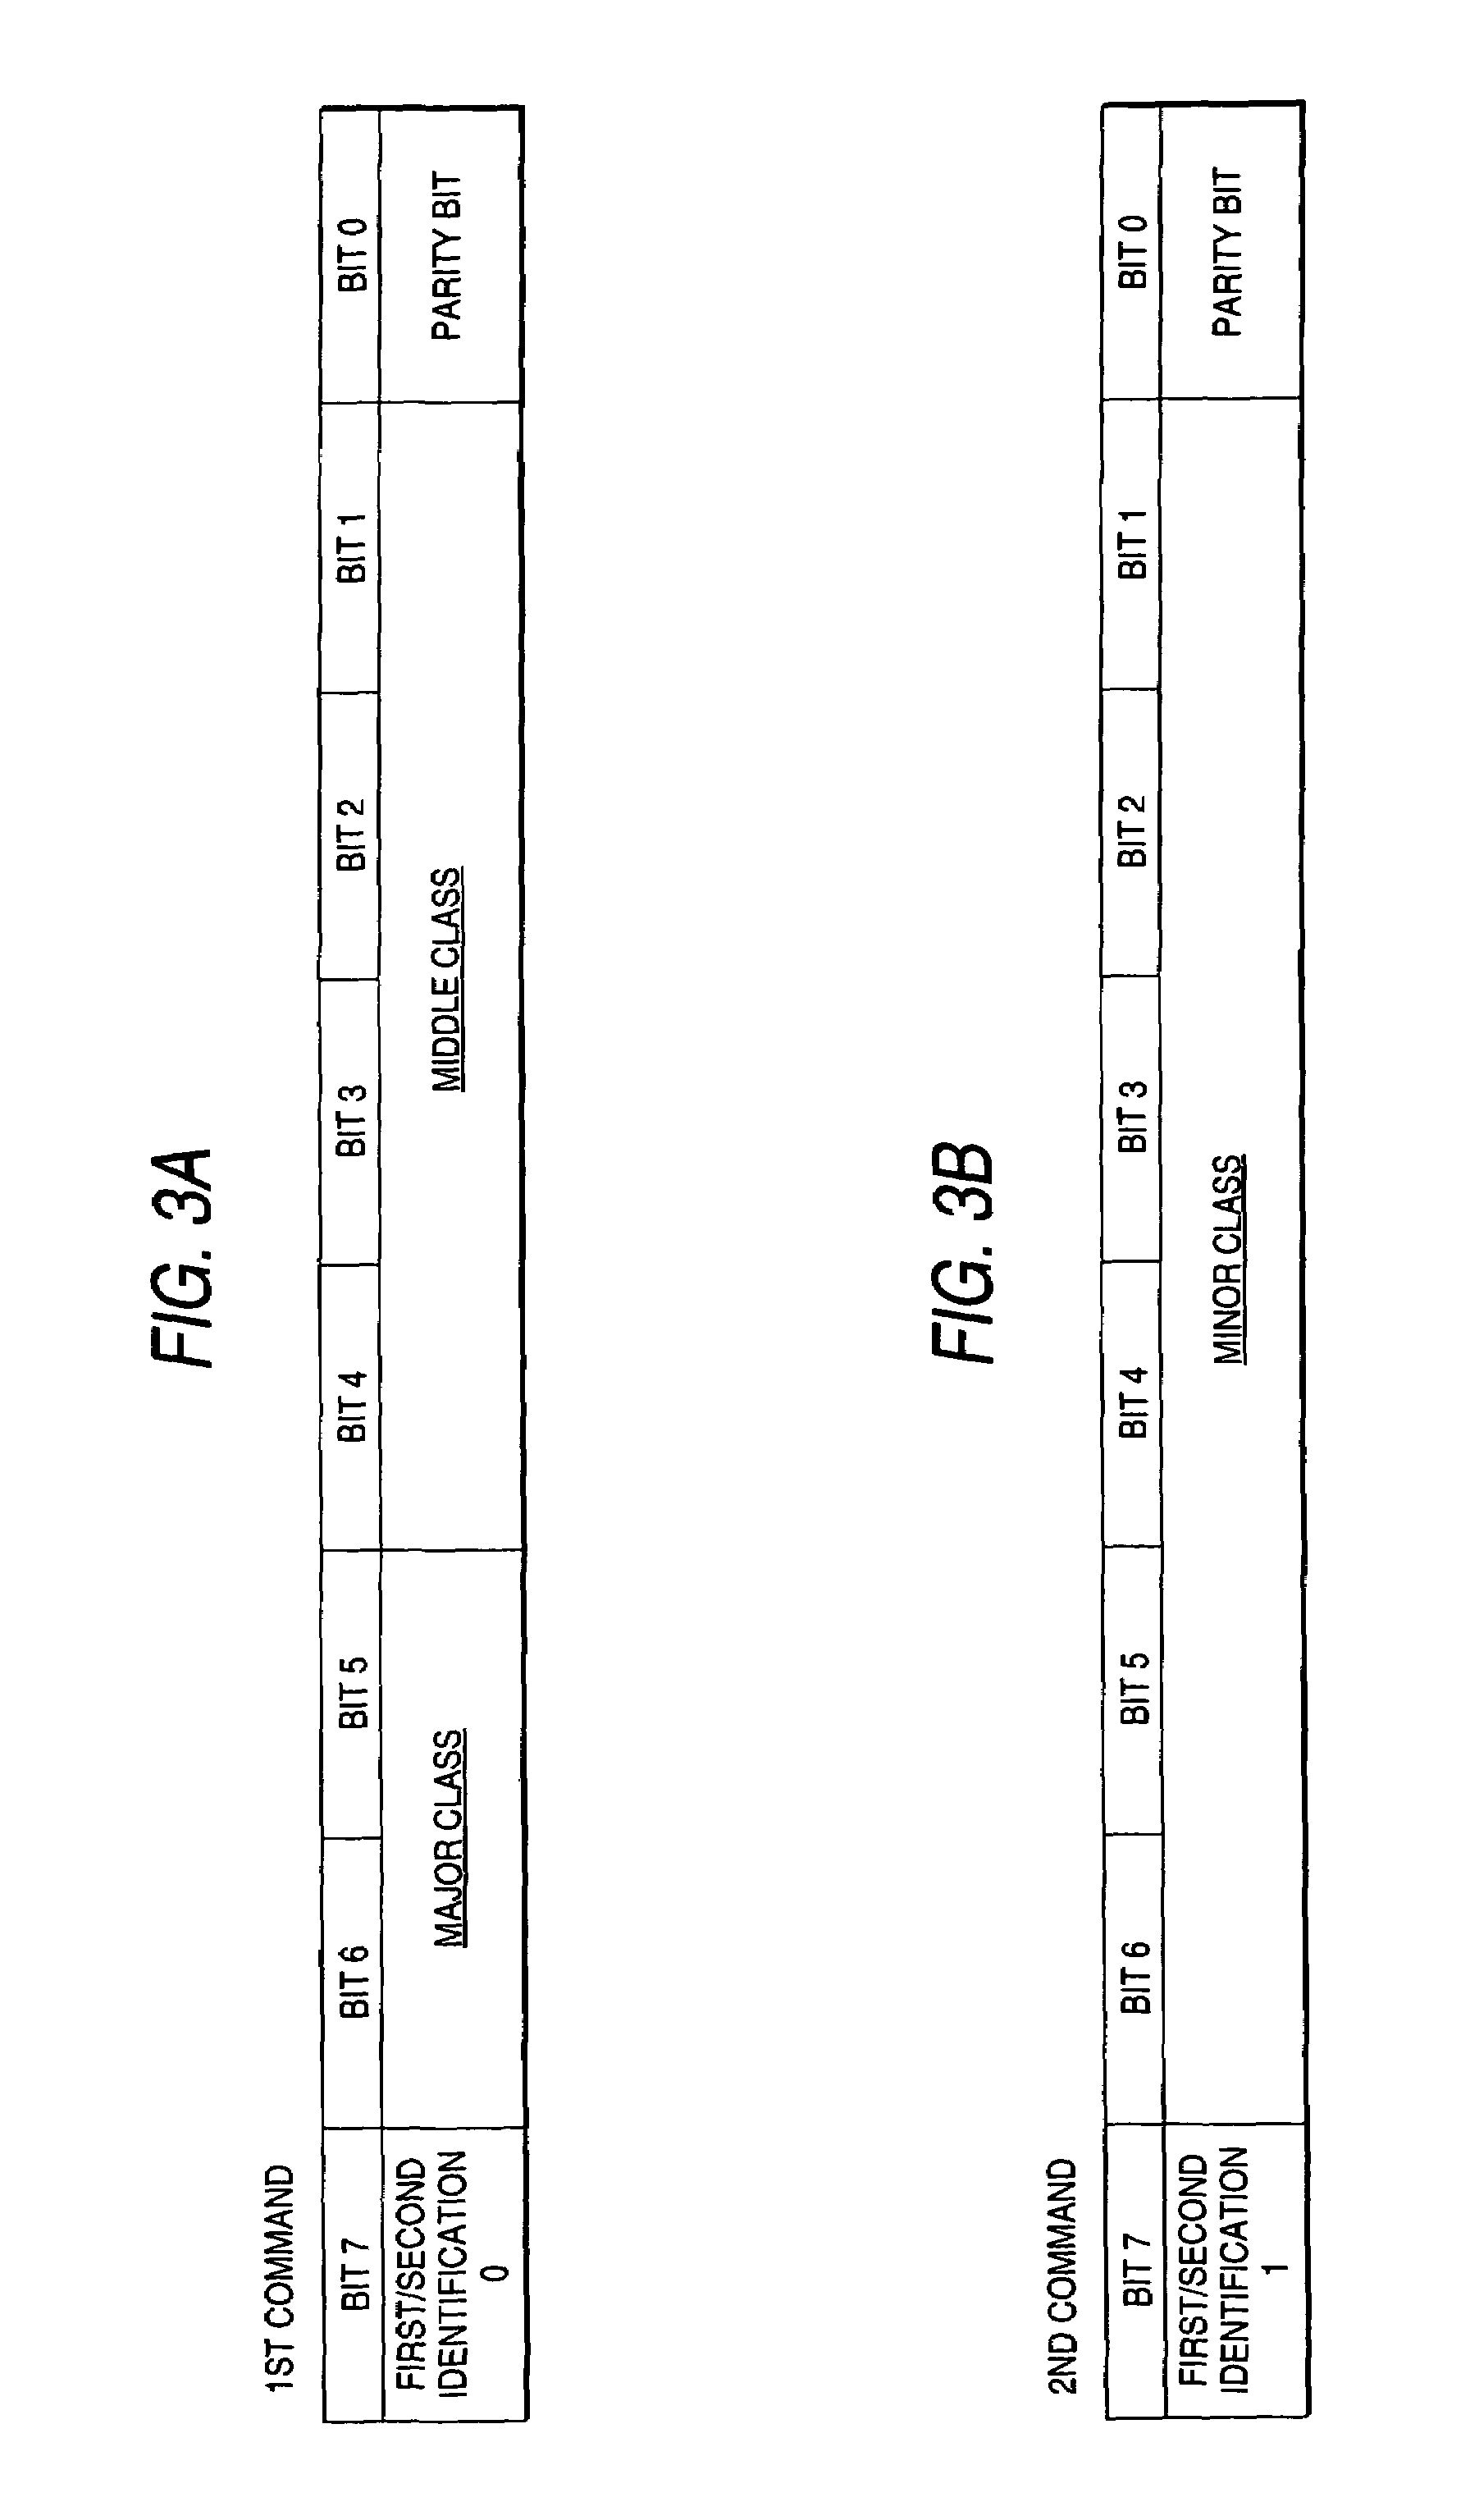 Printer having controller transmitting commands to print engine responsive to commands